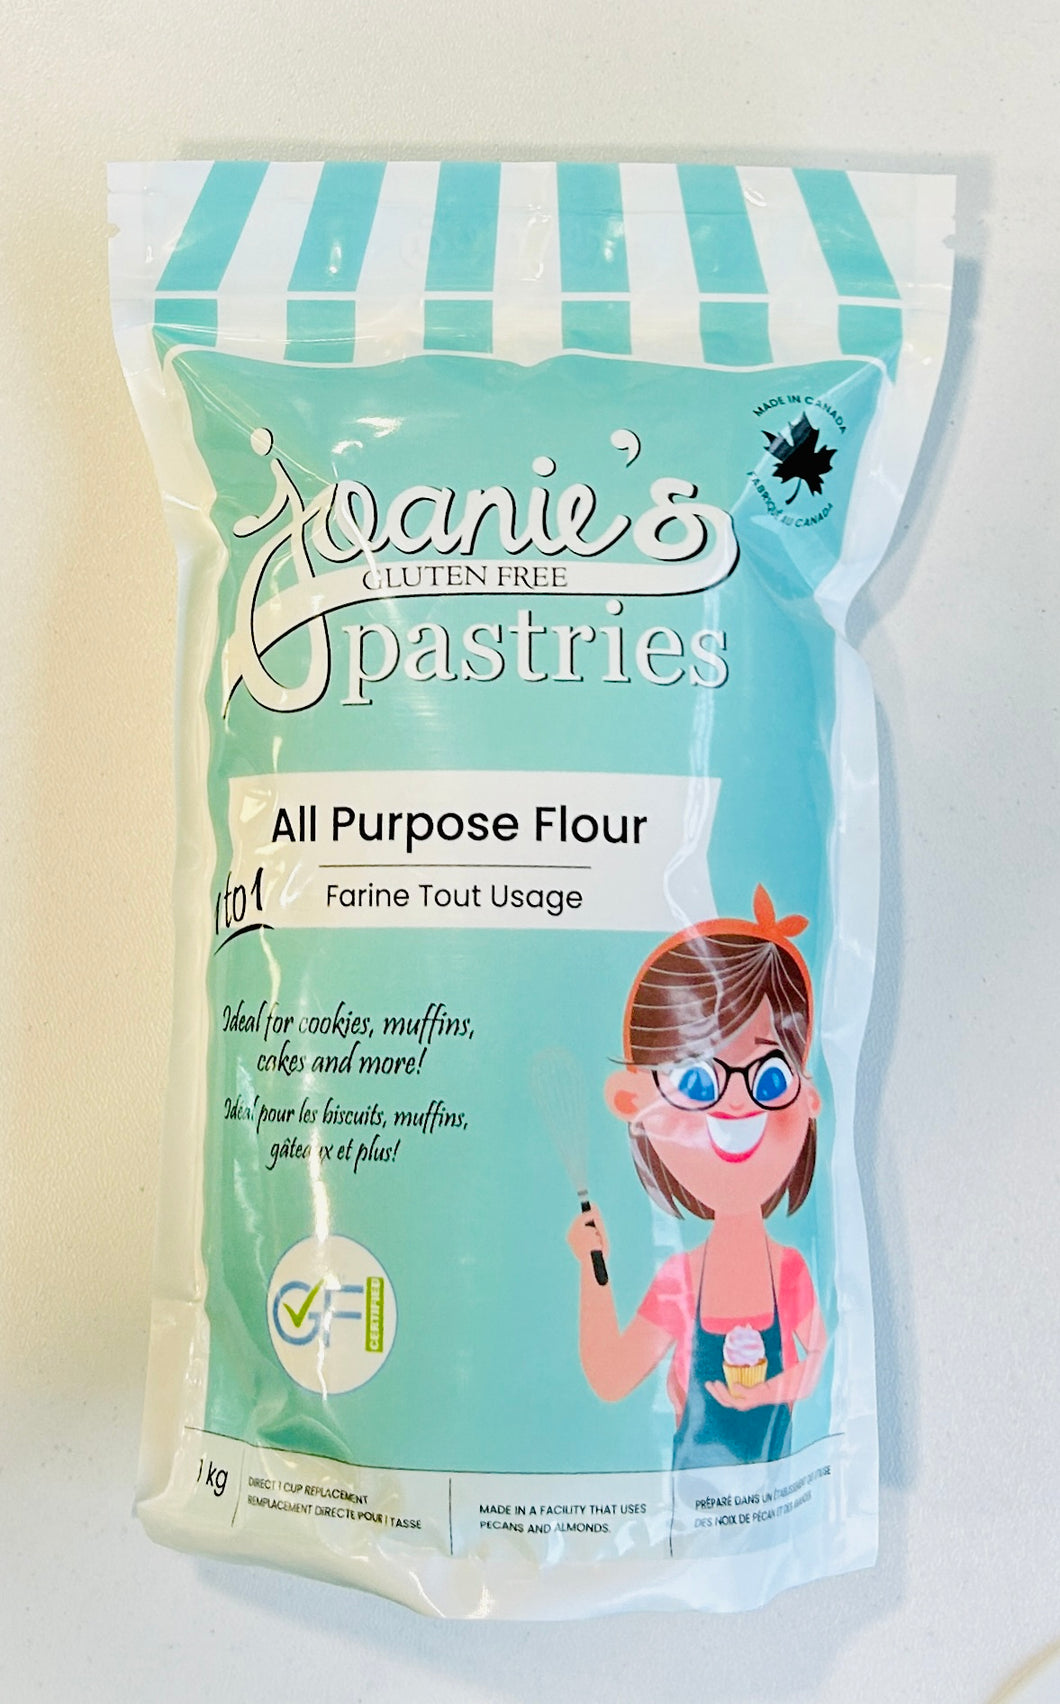 All Purpose Flour Mixture by Joanie's Pastries